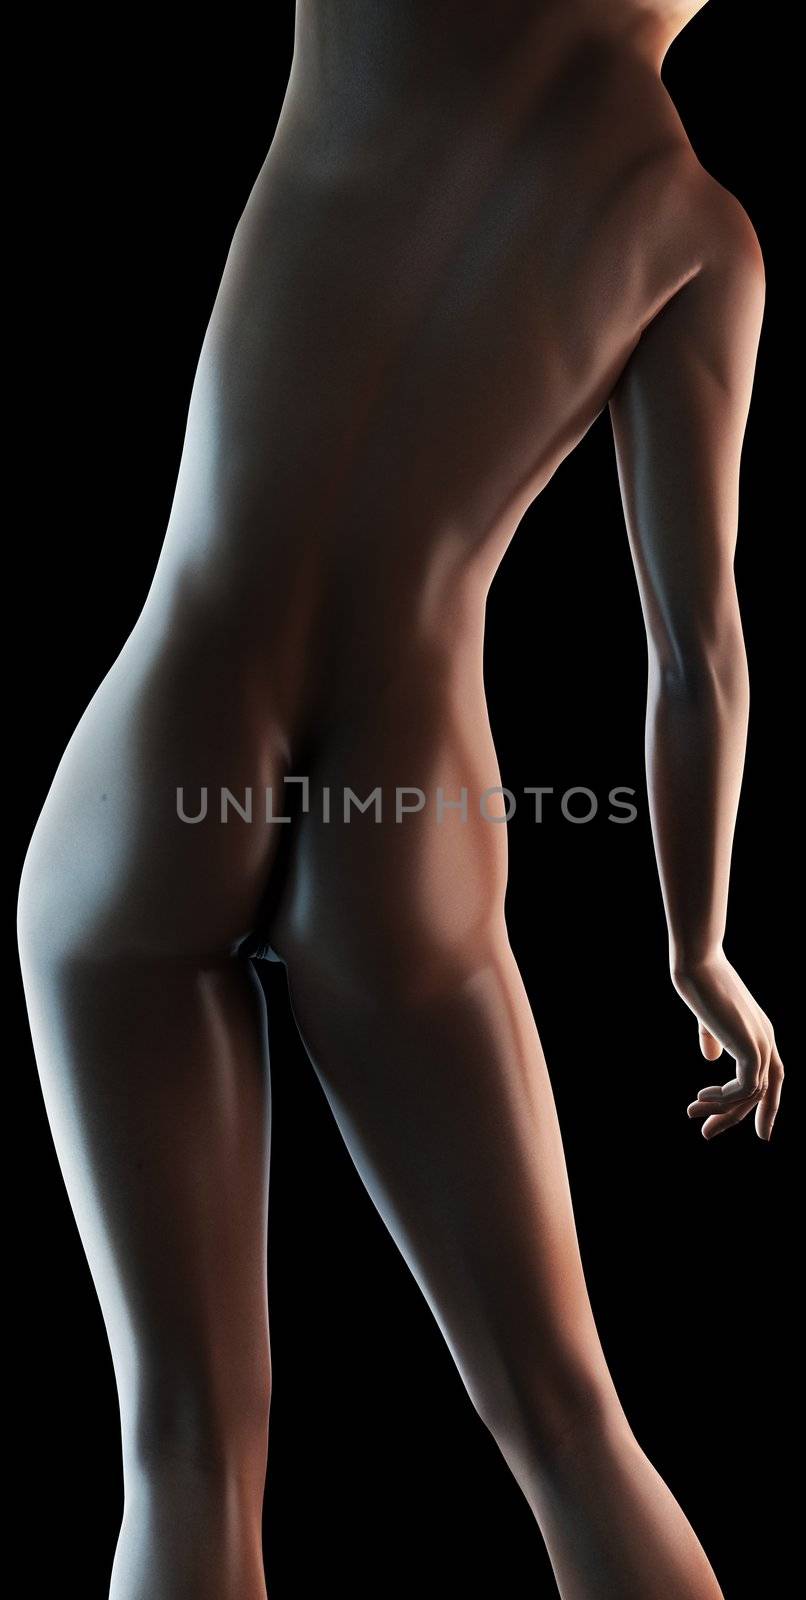 sexy nude woman made in 3D